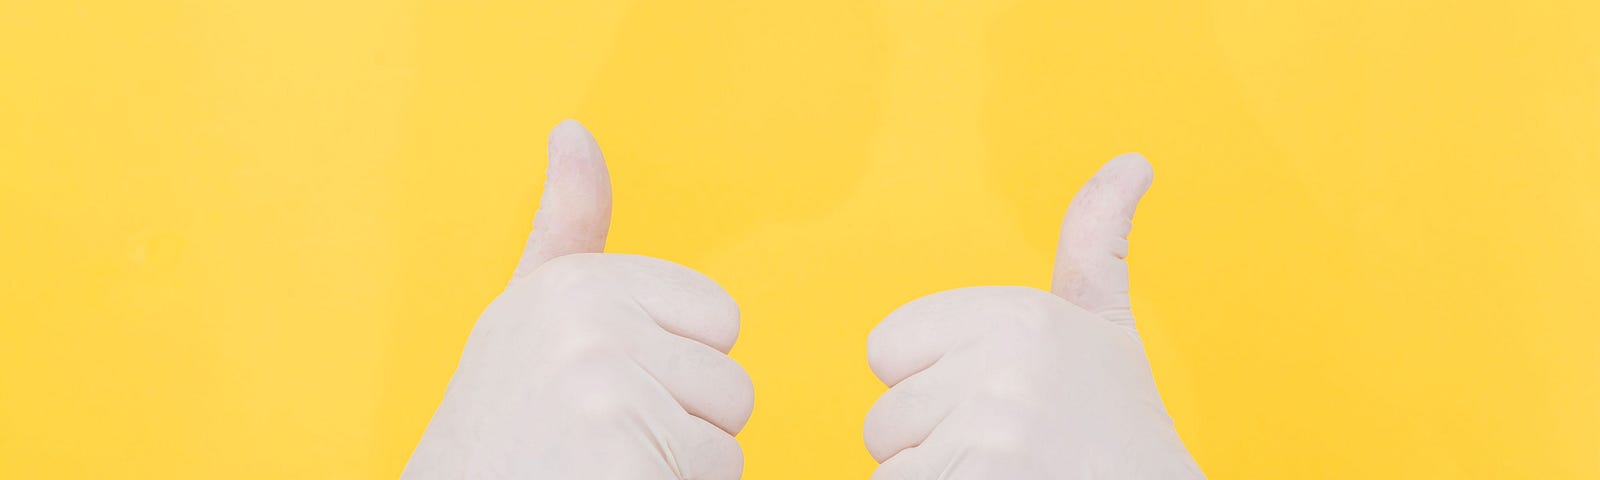 Image of two gloved hands in a “thumbs up” on a yellow background